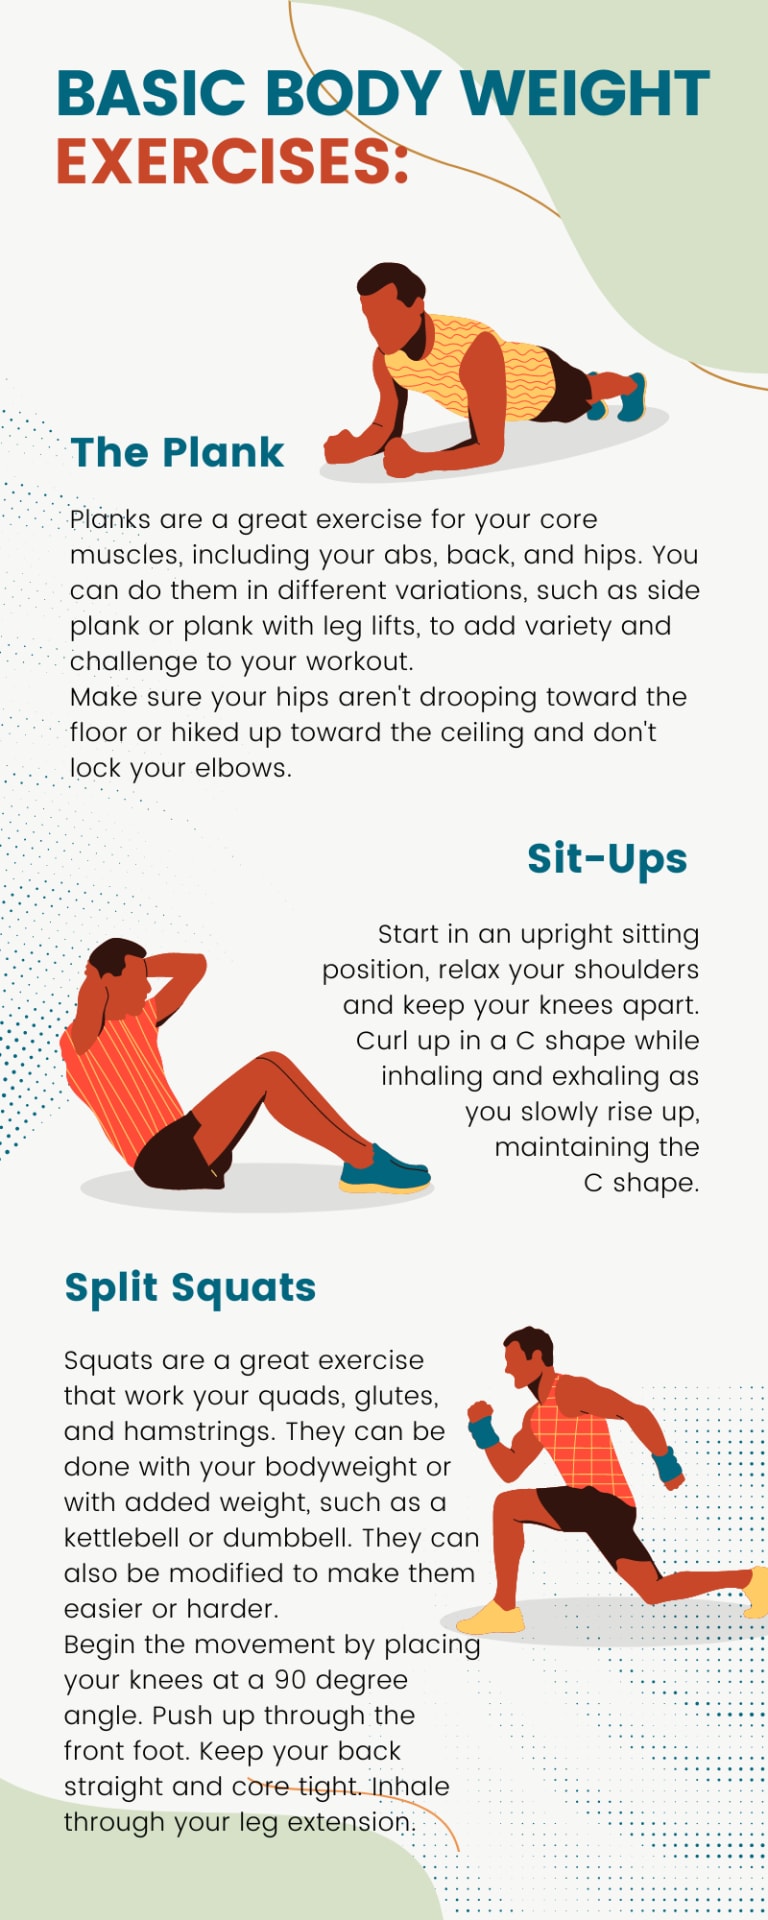 body-weight training workout from home